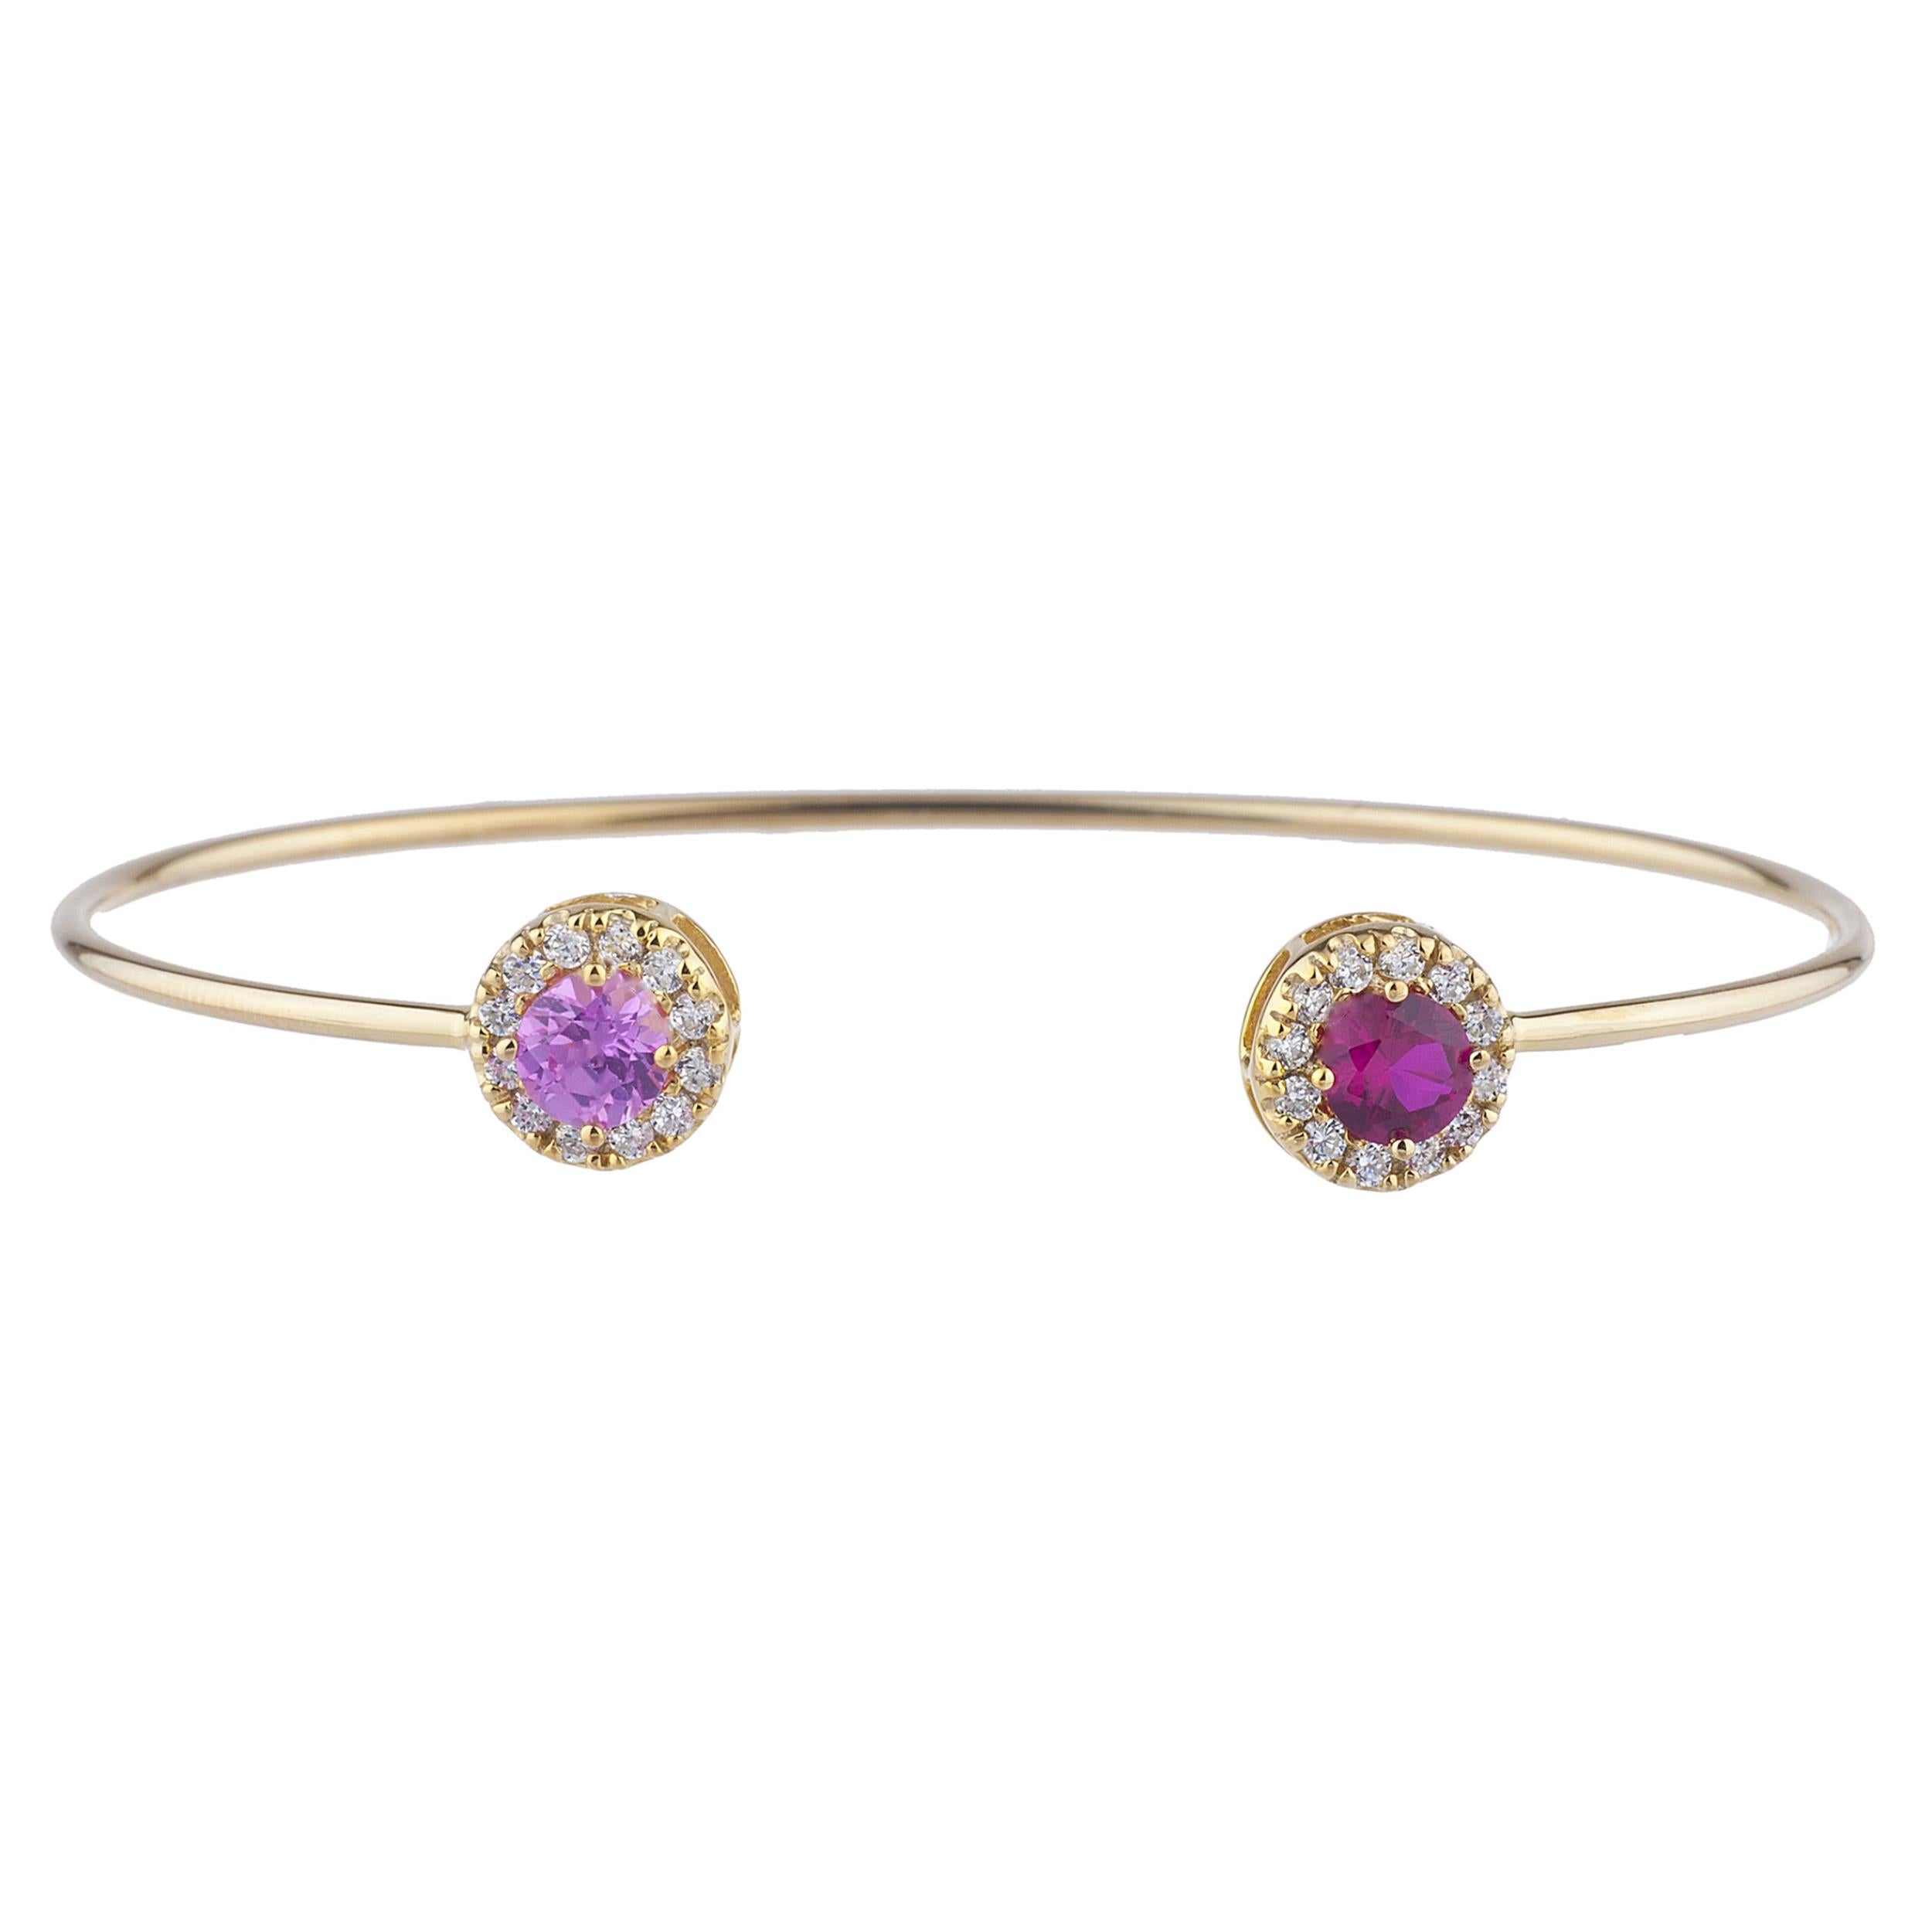 1 Ct Pink Sapphire Halo Design Round Bangle Bracelet 14Kt Yellow Gold Rose Gold Silver